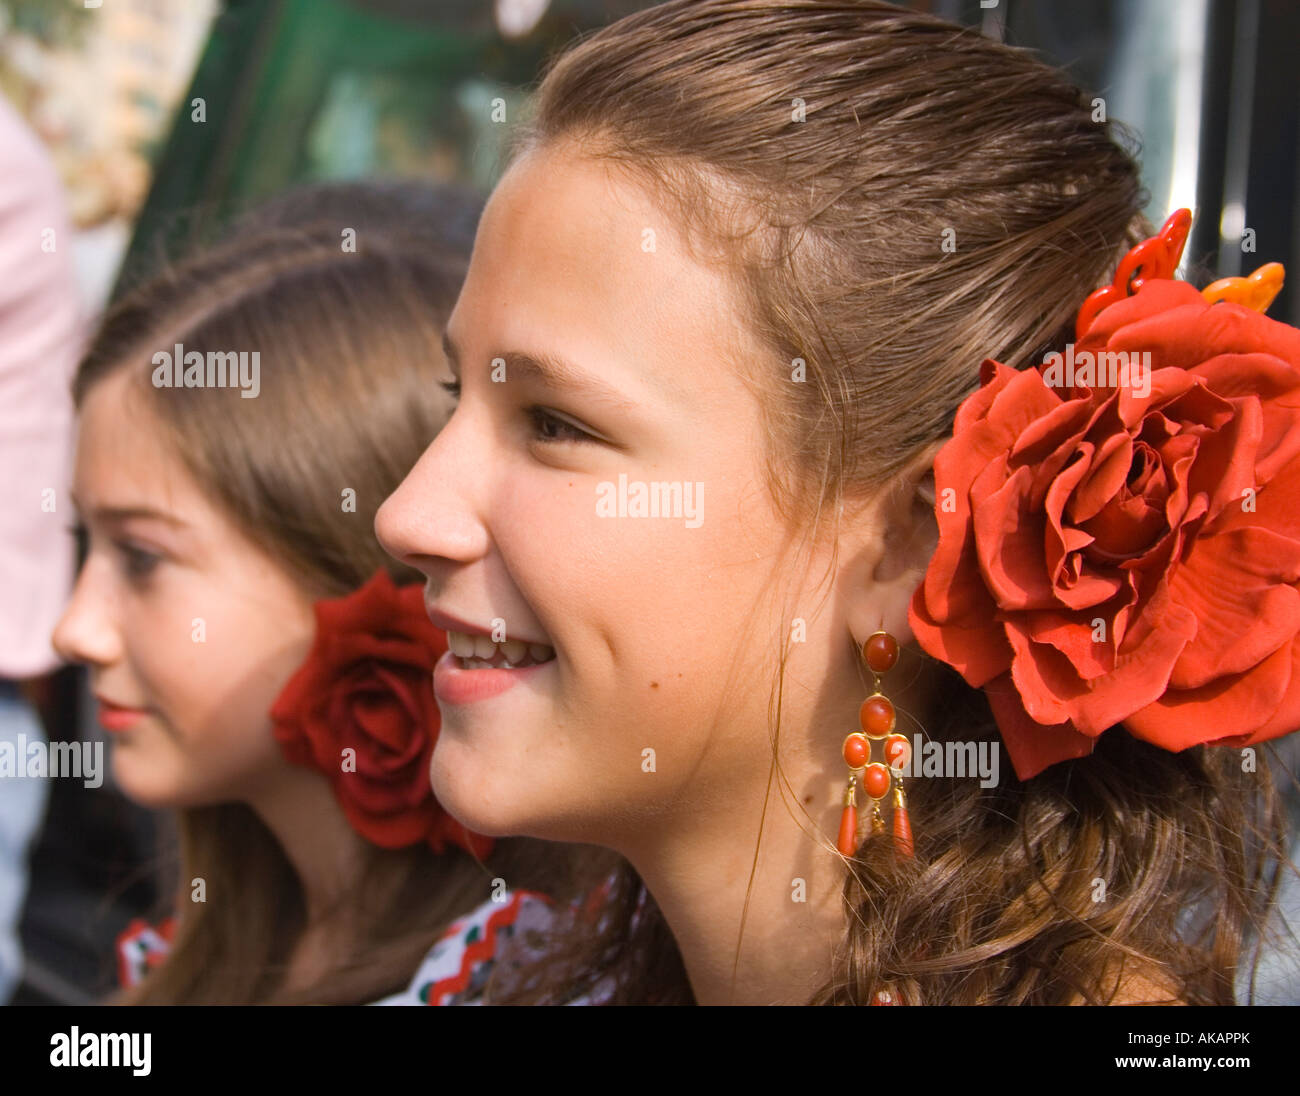 Torremolinos Malaga Province Spain Feria de San Miguel Annual Romeria Two young girls in typical Spanish dress Stock Photo